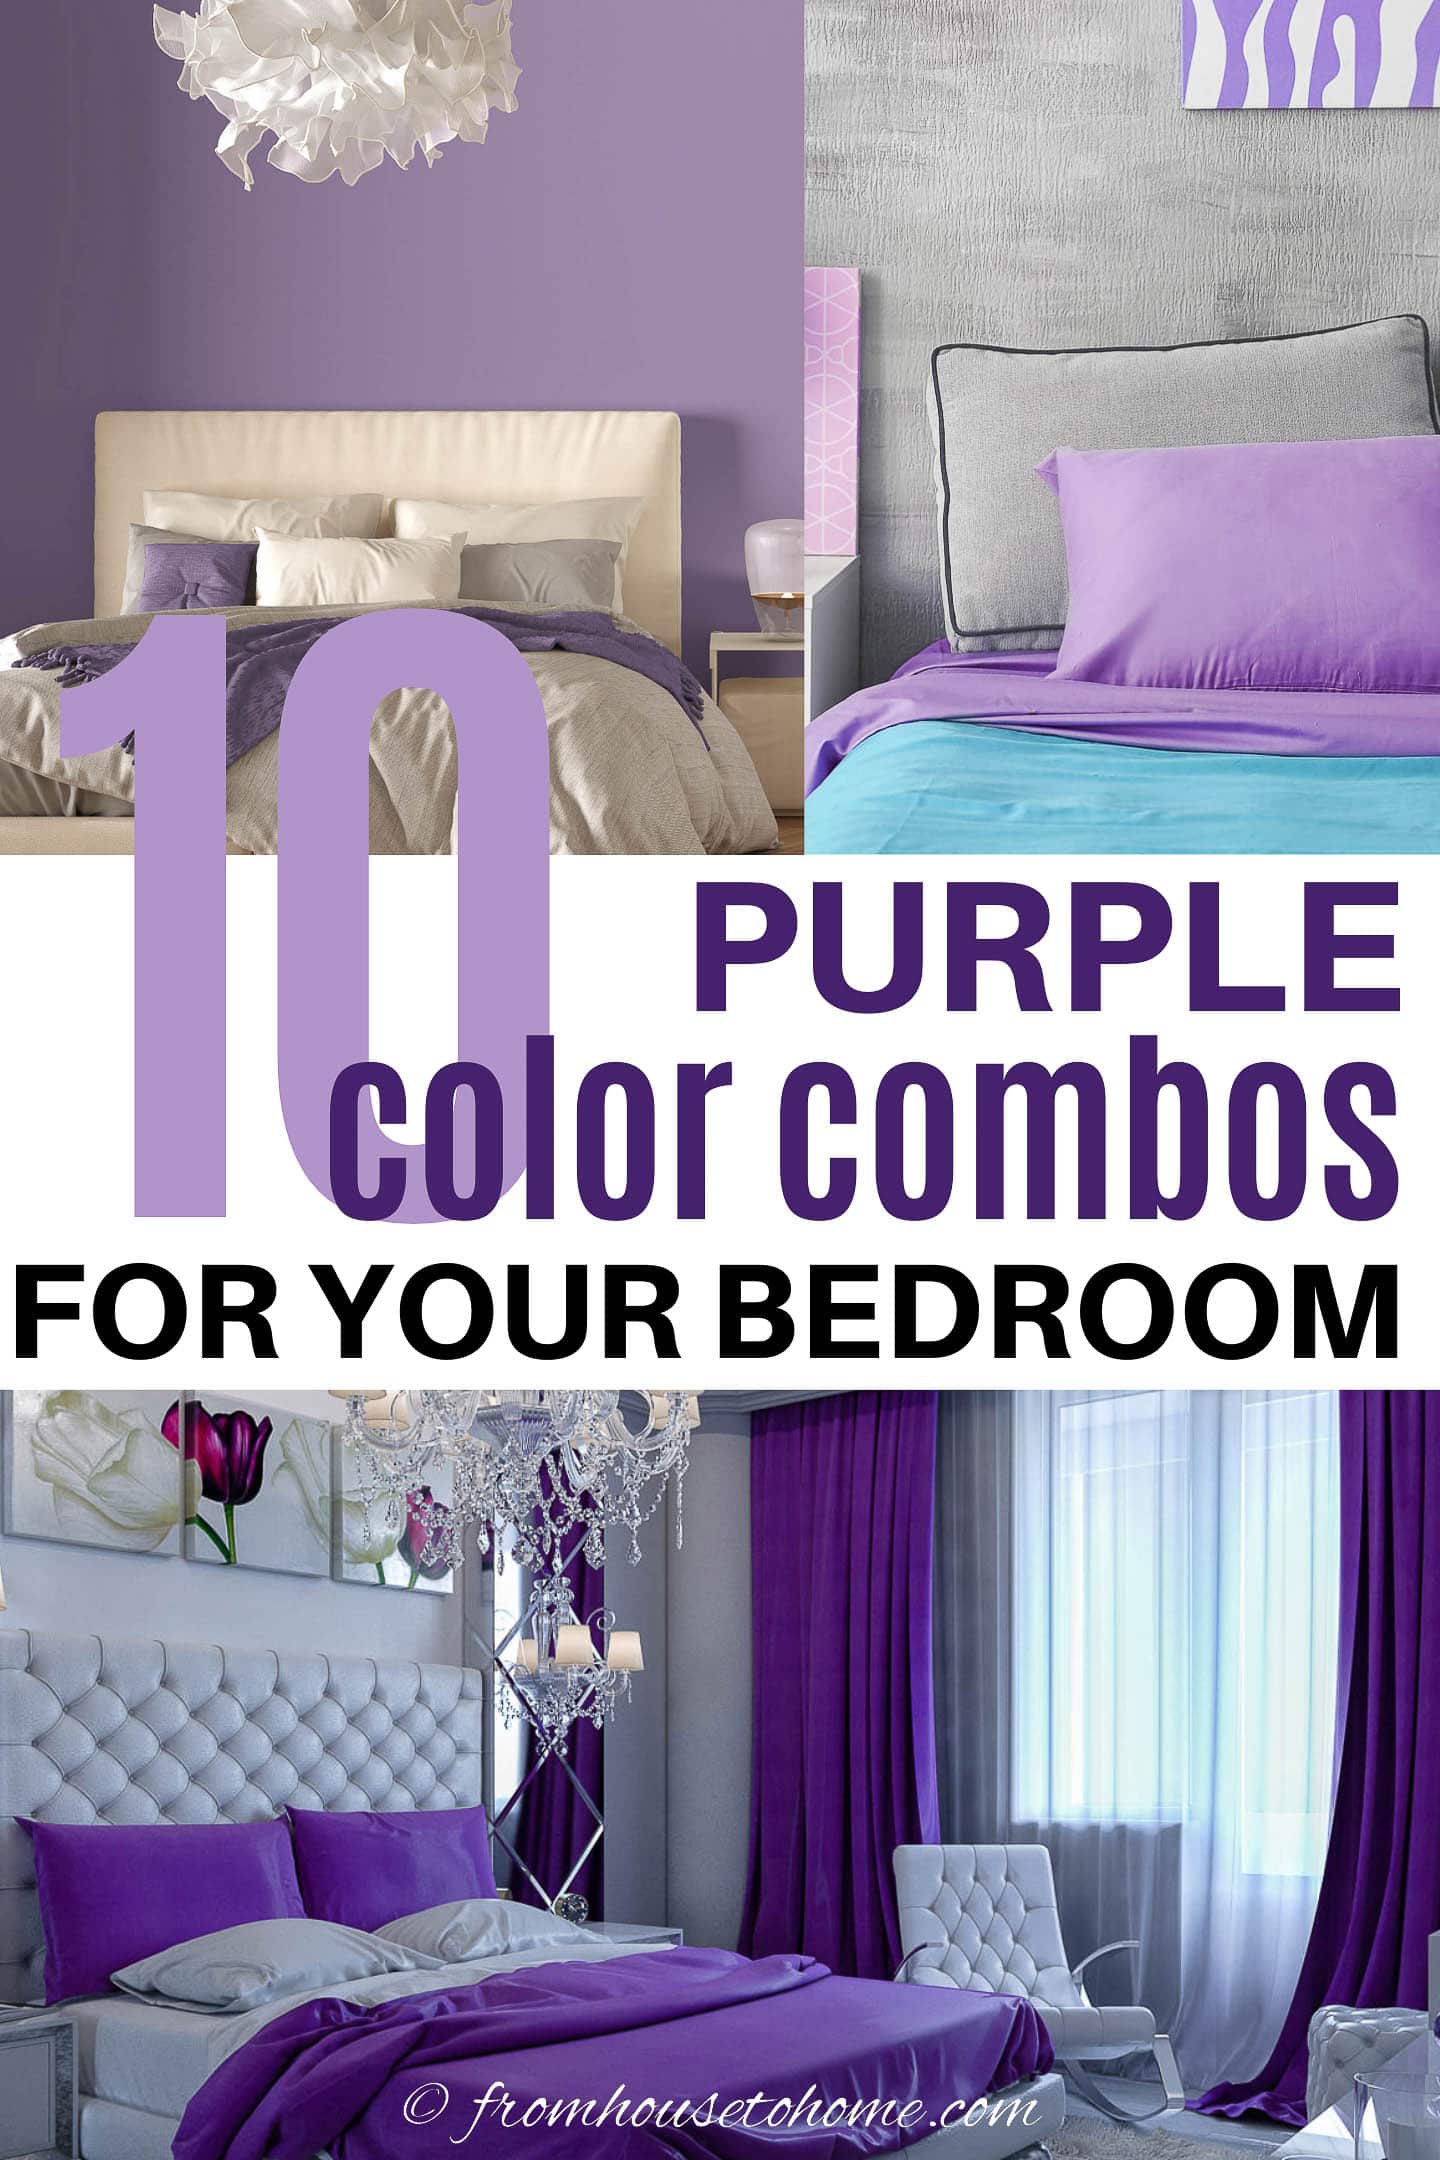 3 pictures of purple bedrooms with the text "10 purple color combos for your bedroom" in the middle